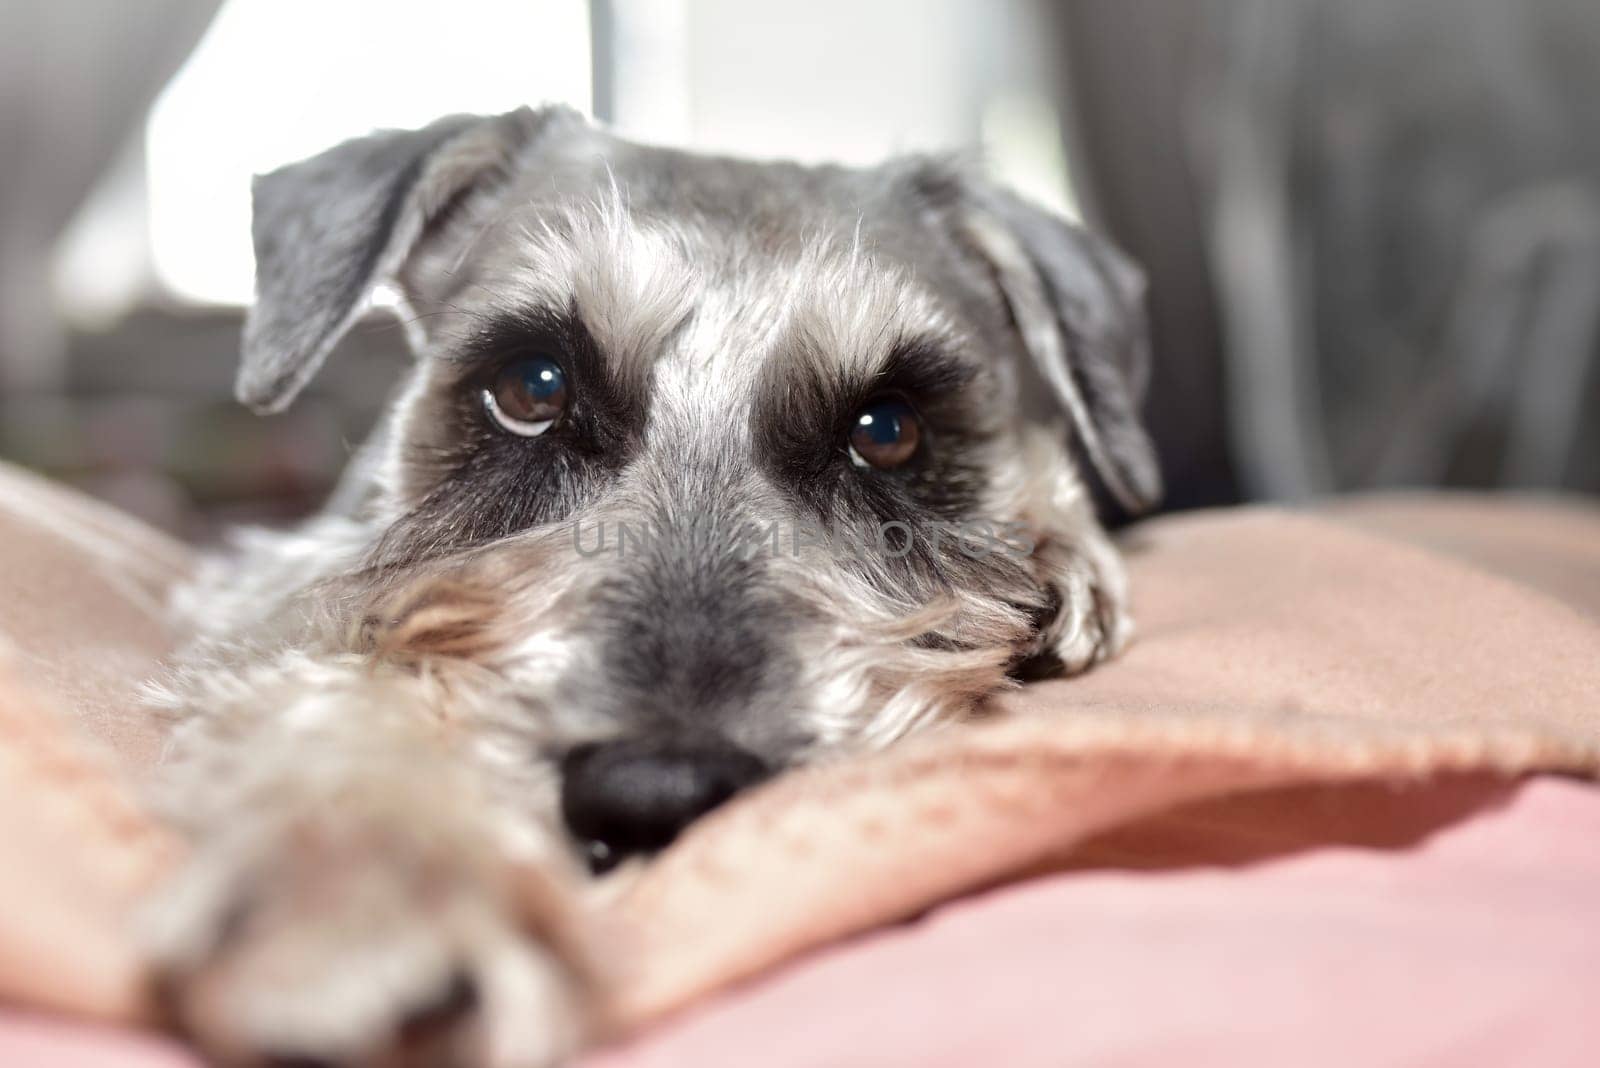 Schnauzer dog is lying on the bed. The dog looks with kind eyes lying on the bed. Cute dog with kind eyes.